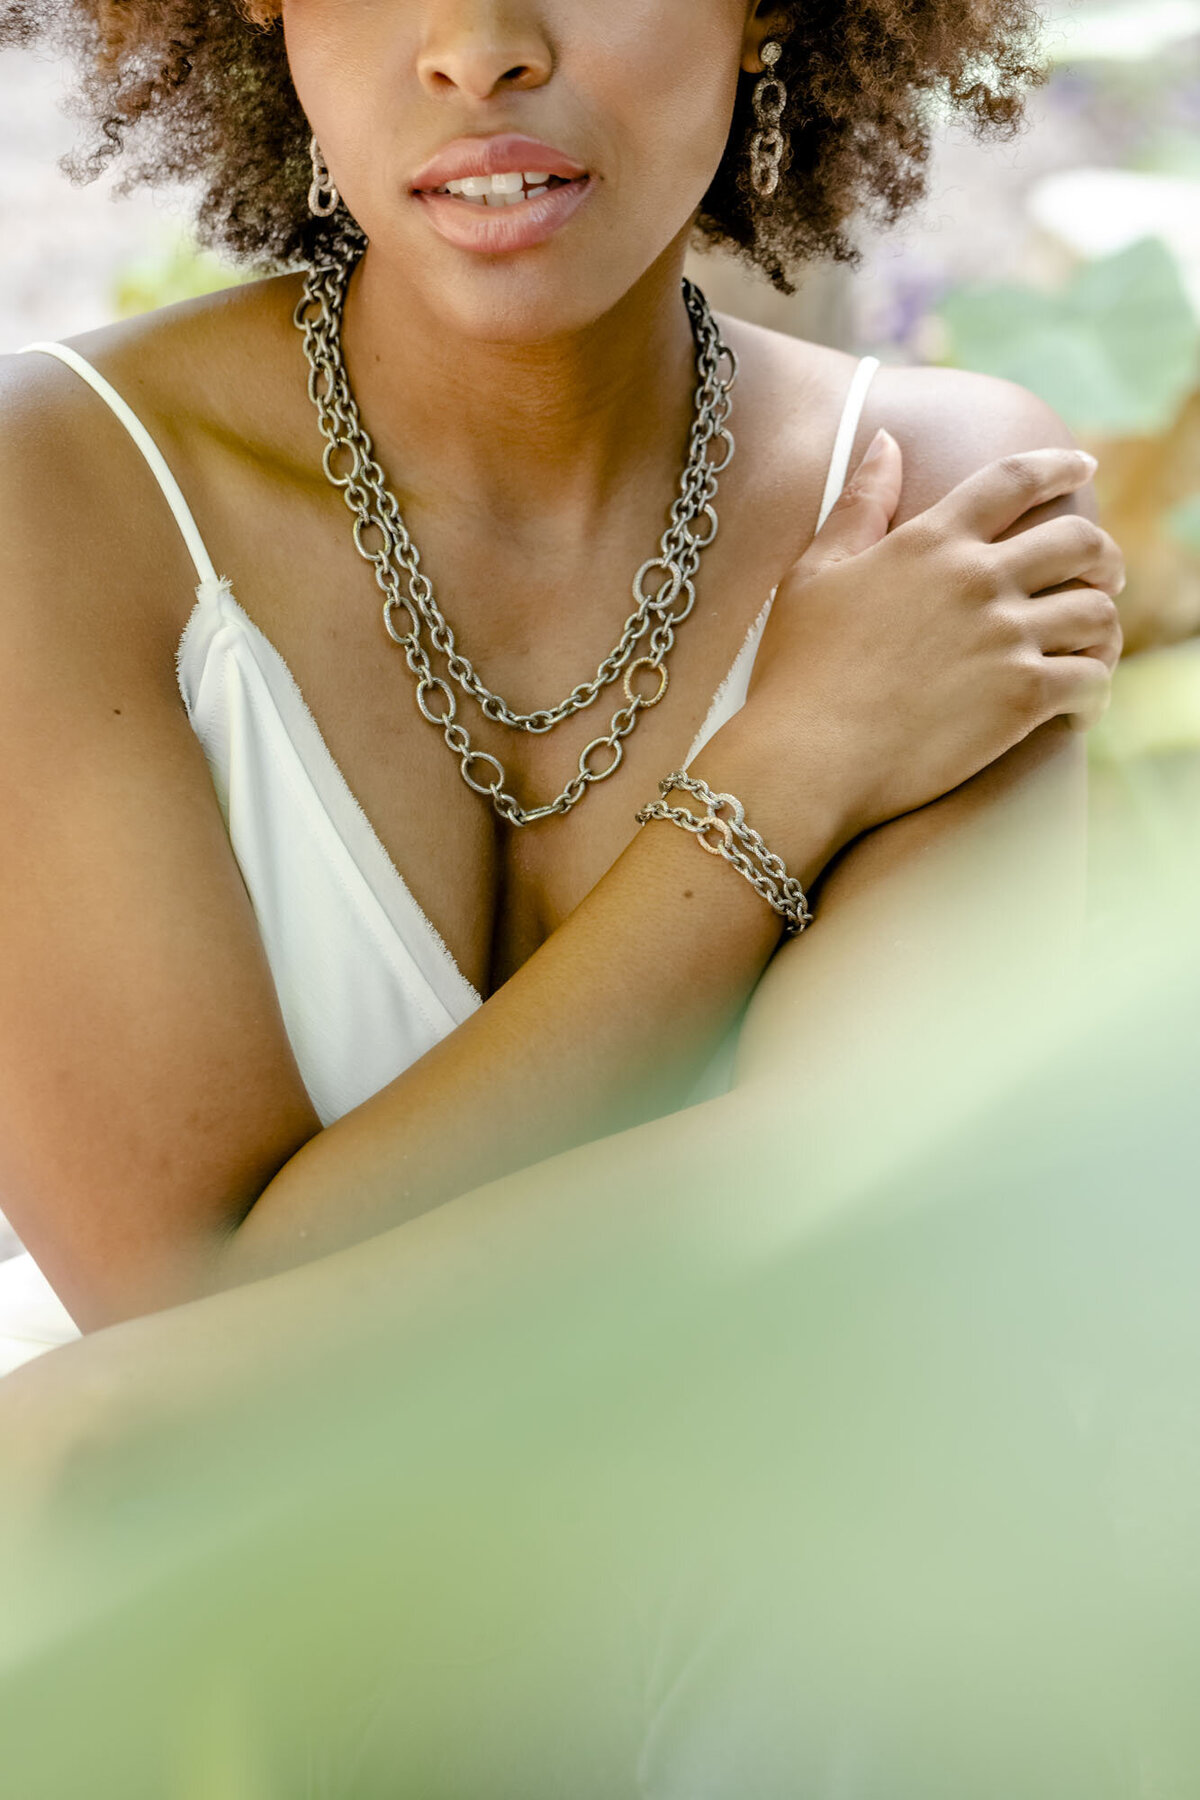 professional-product-jewelry-model-brio-photography-austin-13